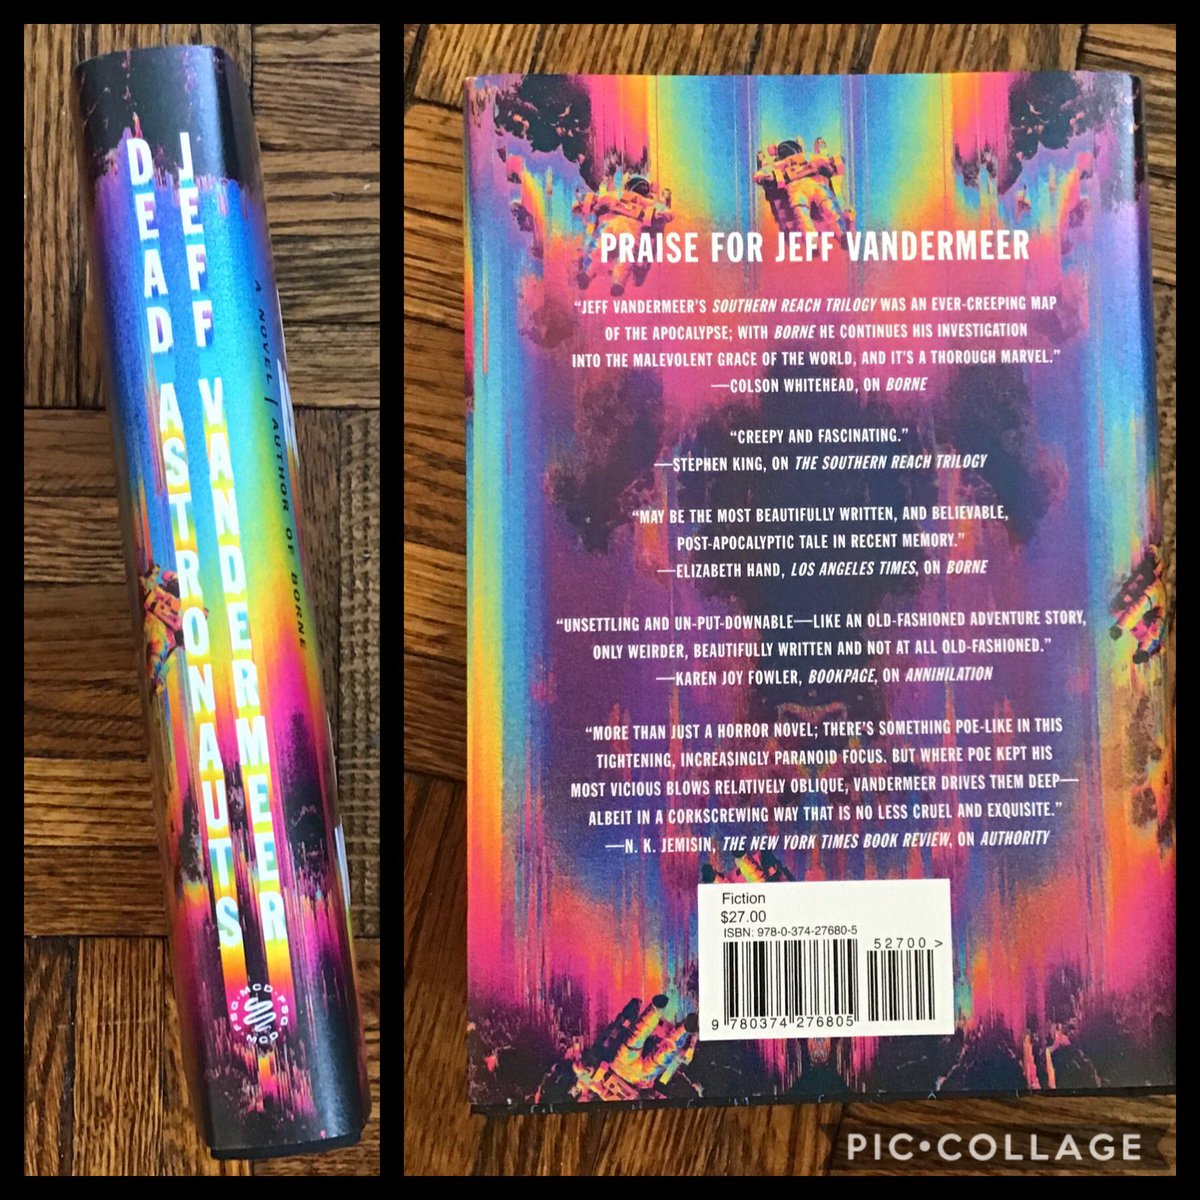 4) Dead Astronauts, Jeff Vandermeer. MCD/FSG Books. Designed by Abby Kagan, with additional credit for illustrations by Mario Tauchi and diagrams by Jeremy Zerfoss. ISBN 978-0-374-27680-5. Fiction.I’ve raved about this one before, but it’s GORGEOUS, and IMMEDIATELY arresting.